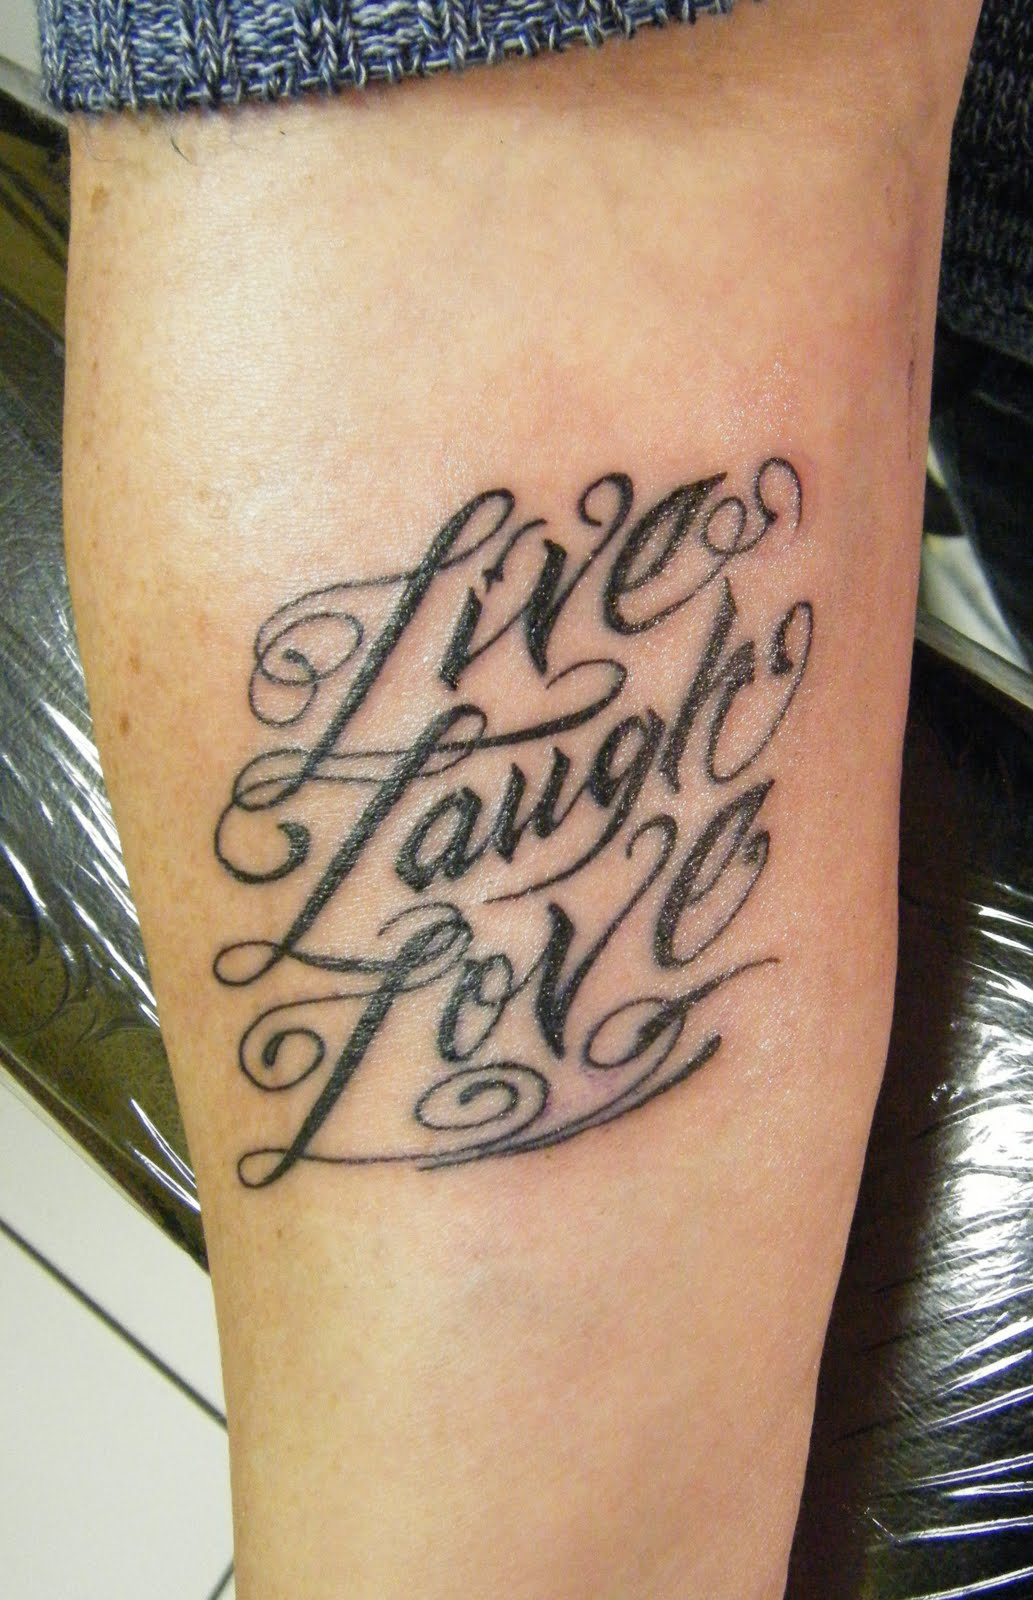 Live Laugh Love Tattoos Designs Ideas And Meaning Tattoos For You in sizing...